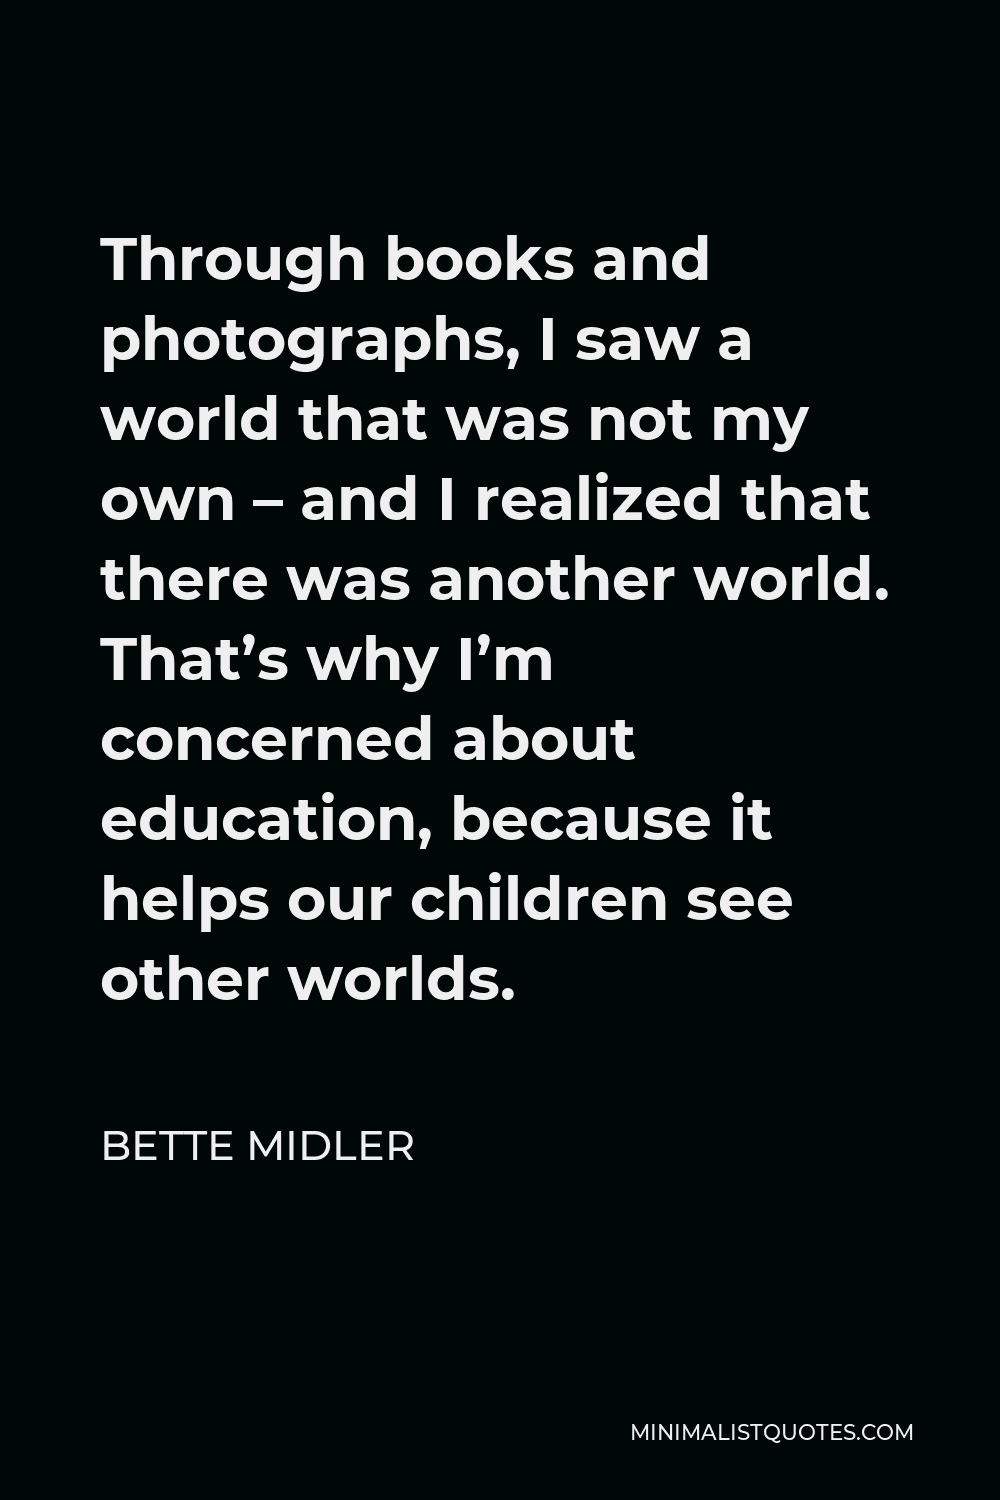 Bette Midler Quote - Through books and photographs, I saw a world that was not my own – and I realized that there was another world. That’s why I’m concerned about education, because it helps our children see other worlds.